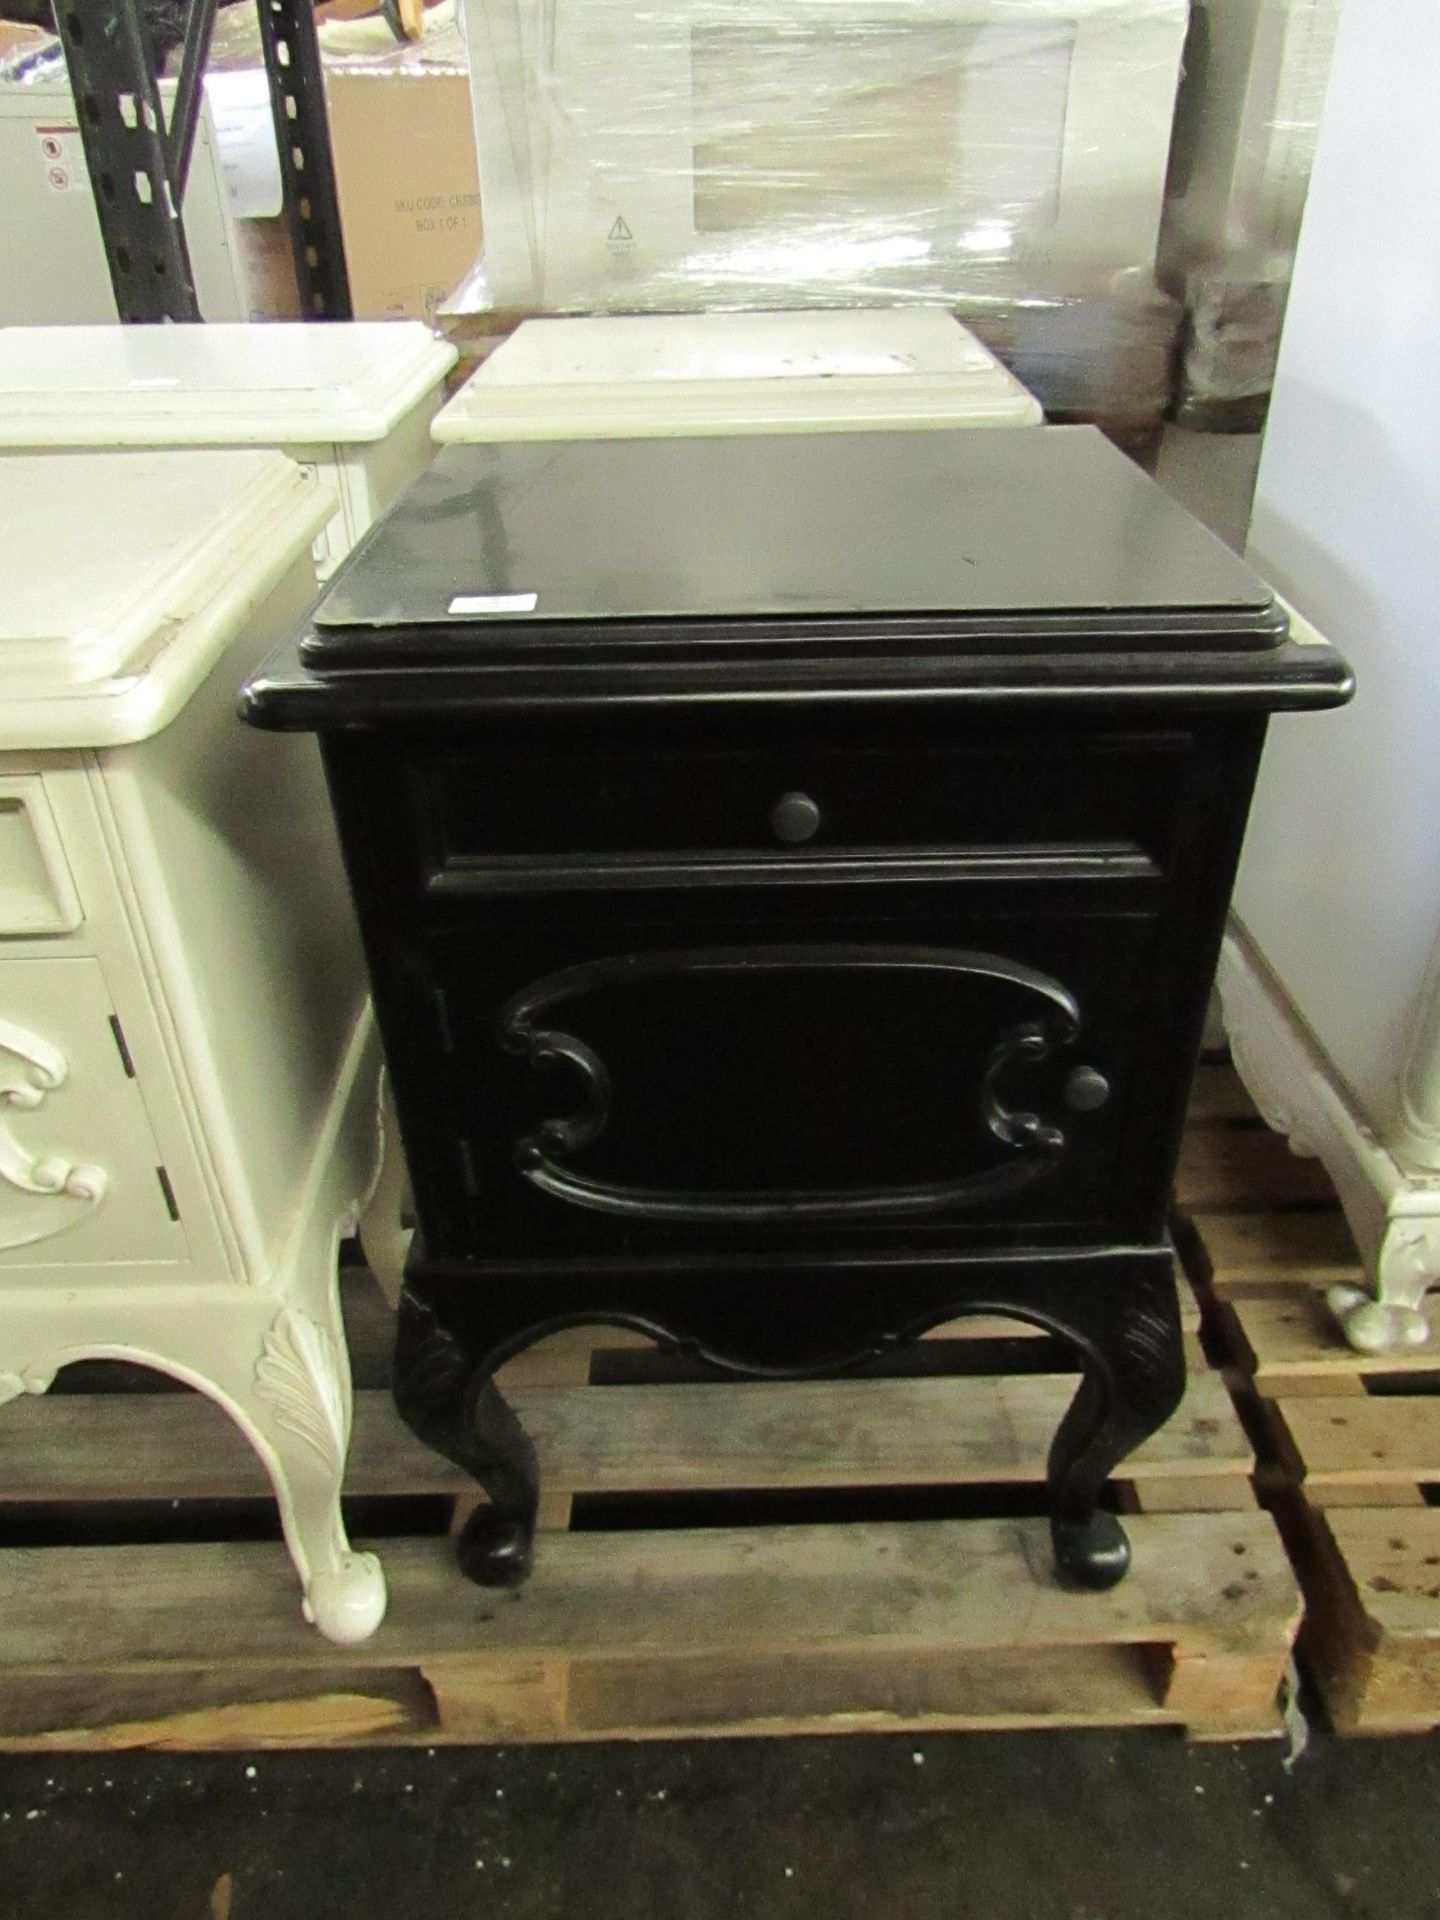 French 2 Drawer Bedside Table, Black. RRP 150